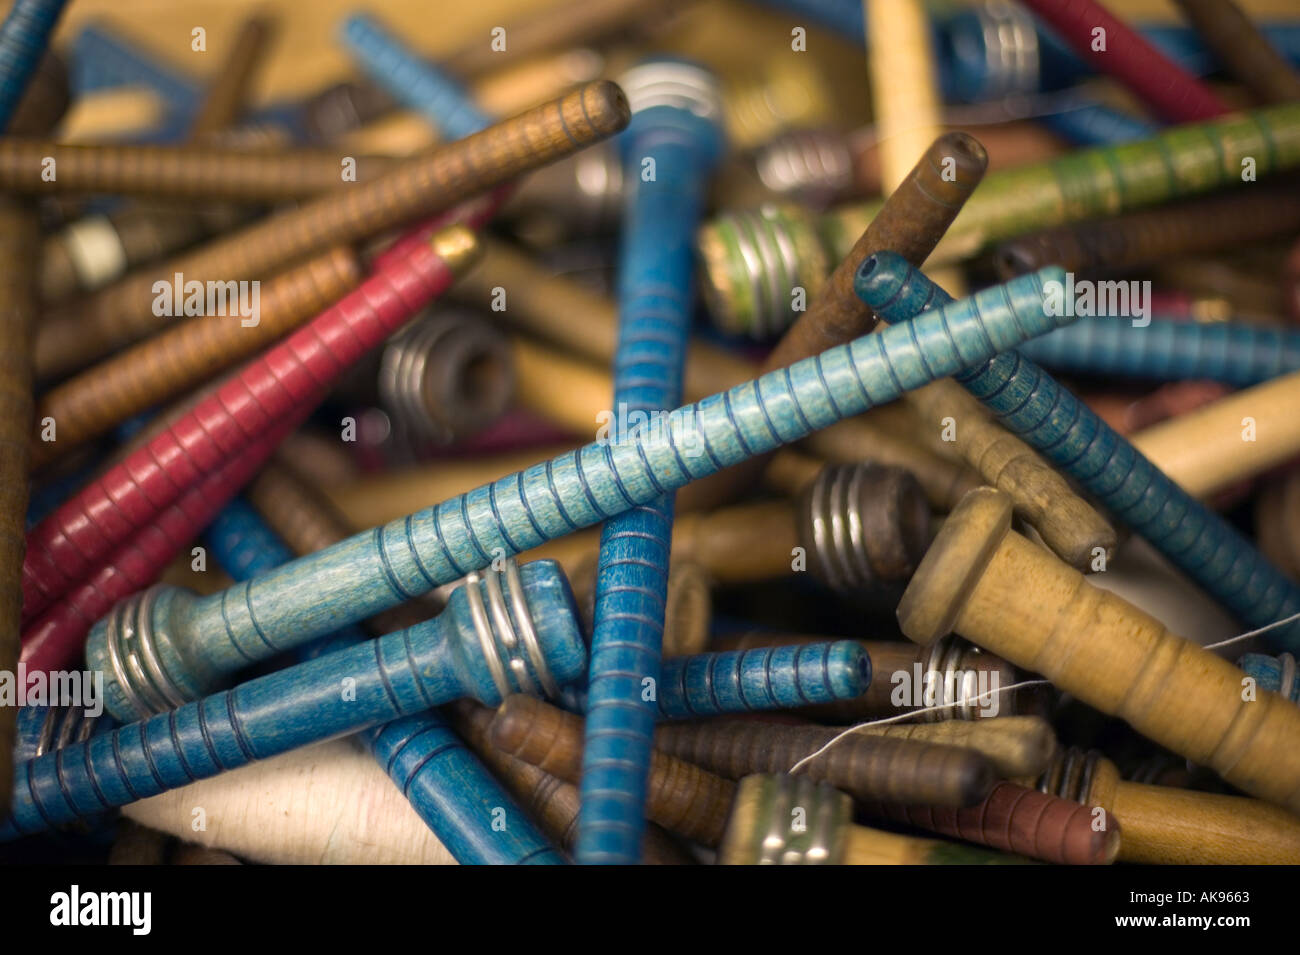 Colored wooden thread spindles from garment industry colorful and empty past their useful life laying every which way in pile Stock Photo